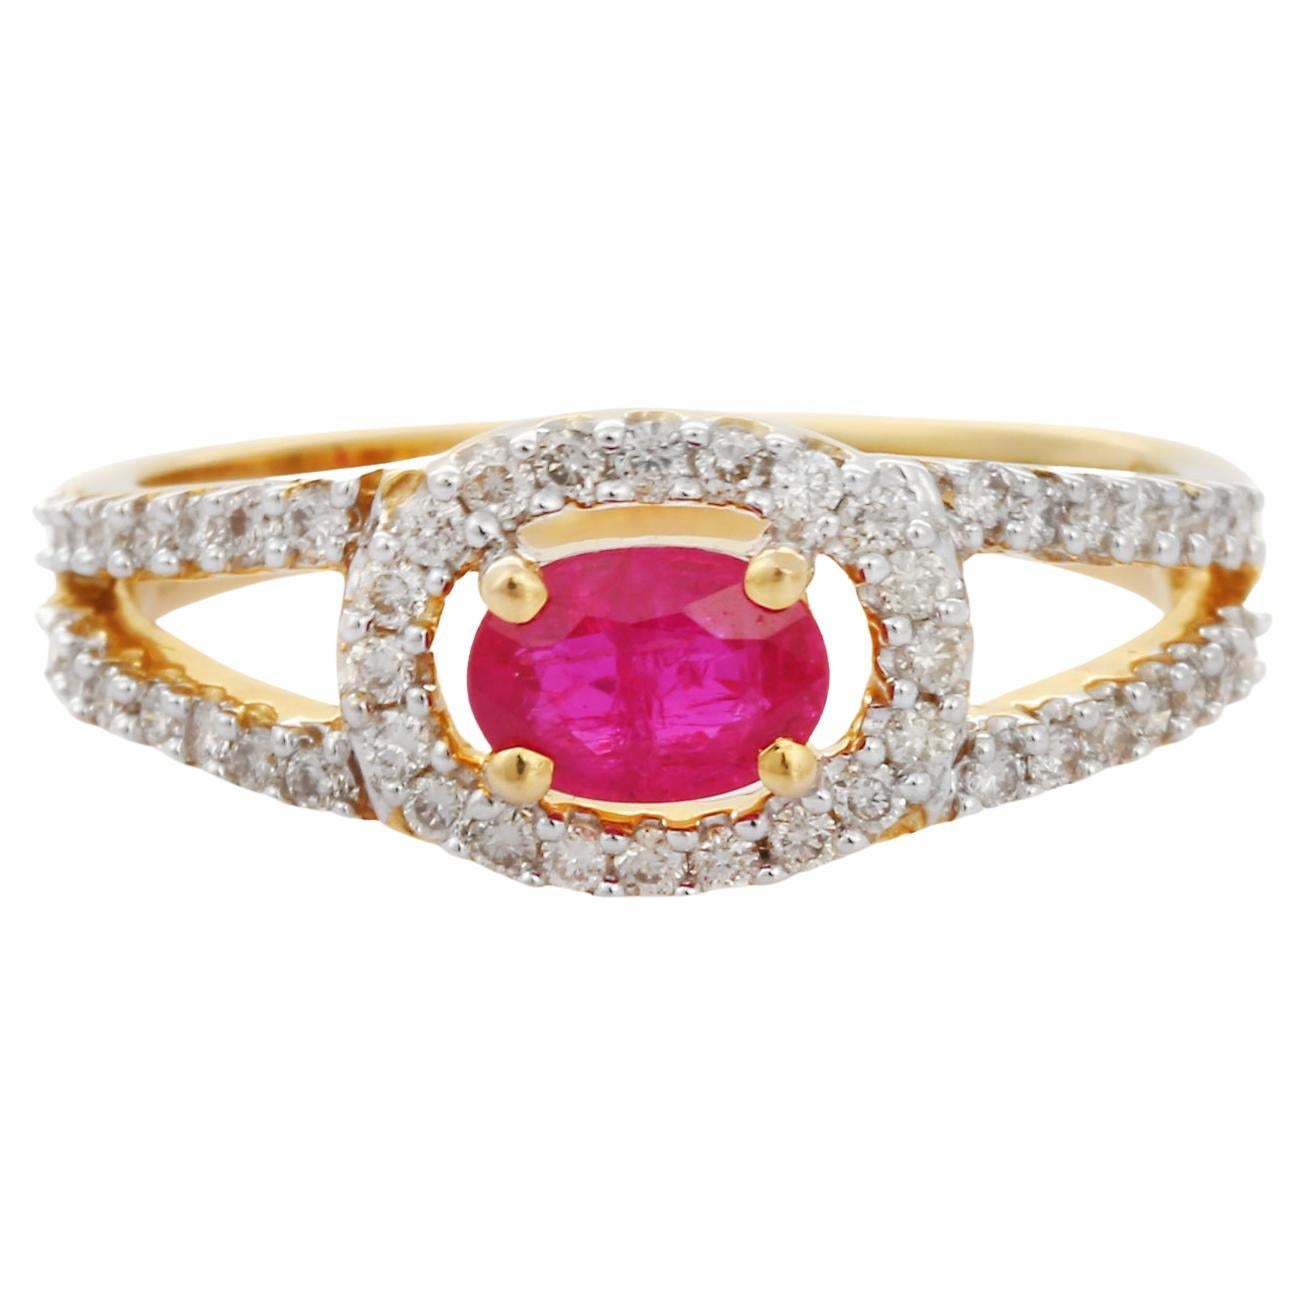 For Sale:  18K Yellow Gold Center Oval Cut Ruby Wedding Ring with Halo of Diamonds 8